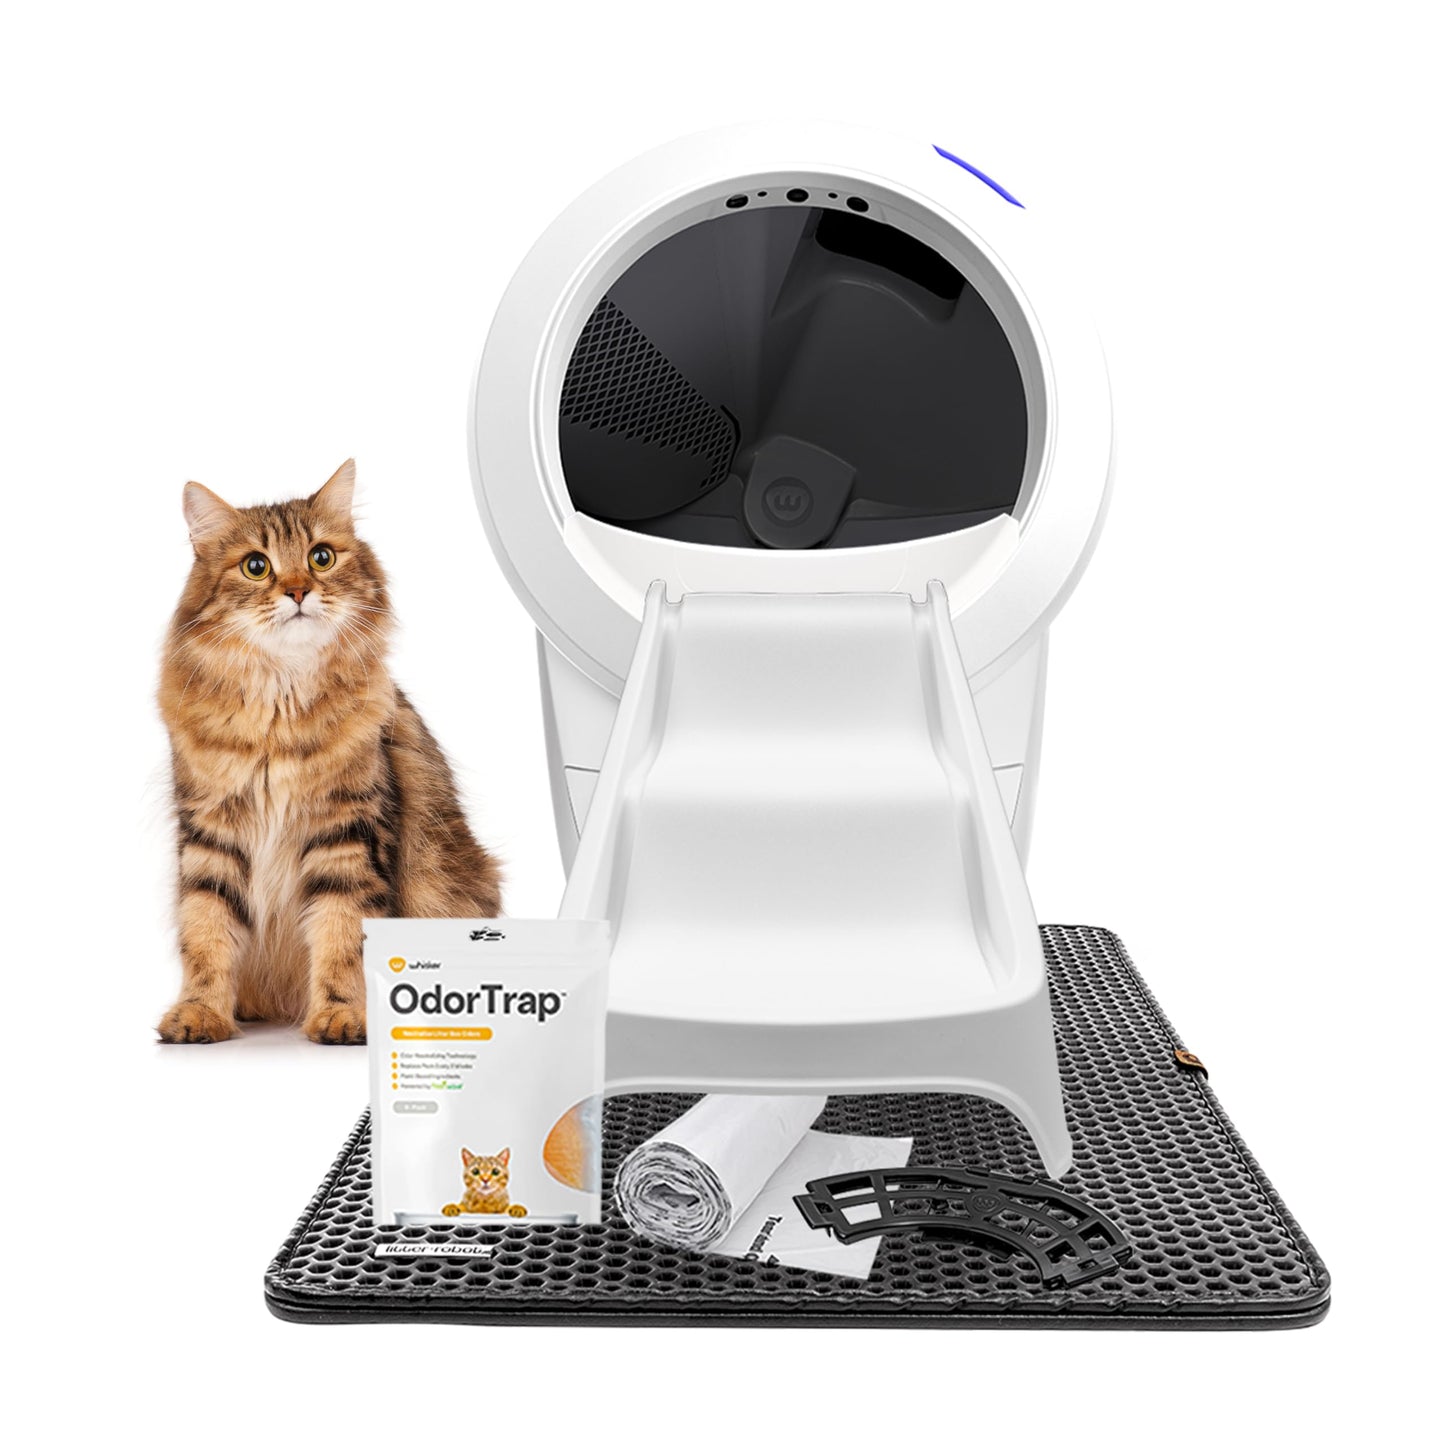 Litter-Robot 4 Bundle by Whisker, White - Automatic, Self-Cleaning Cat Litter Box, Includes Litter-Robot 4, 6 OdorTrap Pack Refills, 50 Waste Drawer Liners, Ramp, Mat & Fence